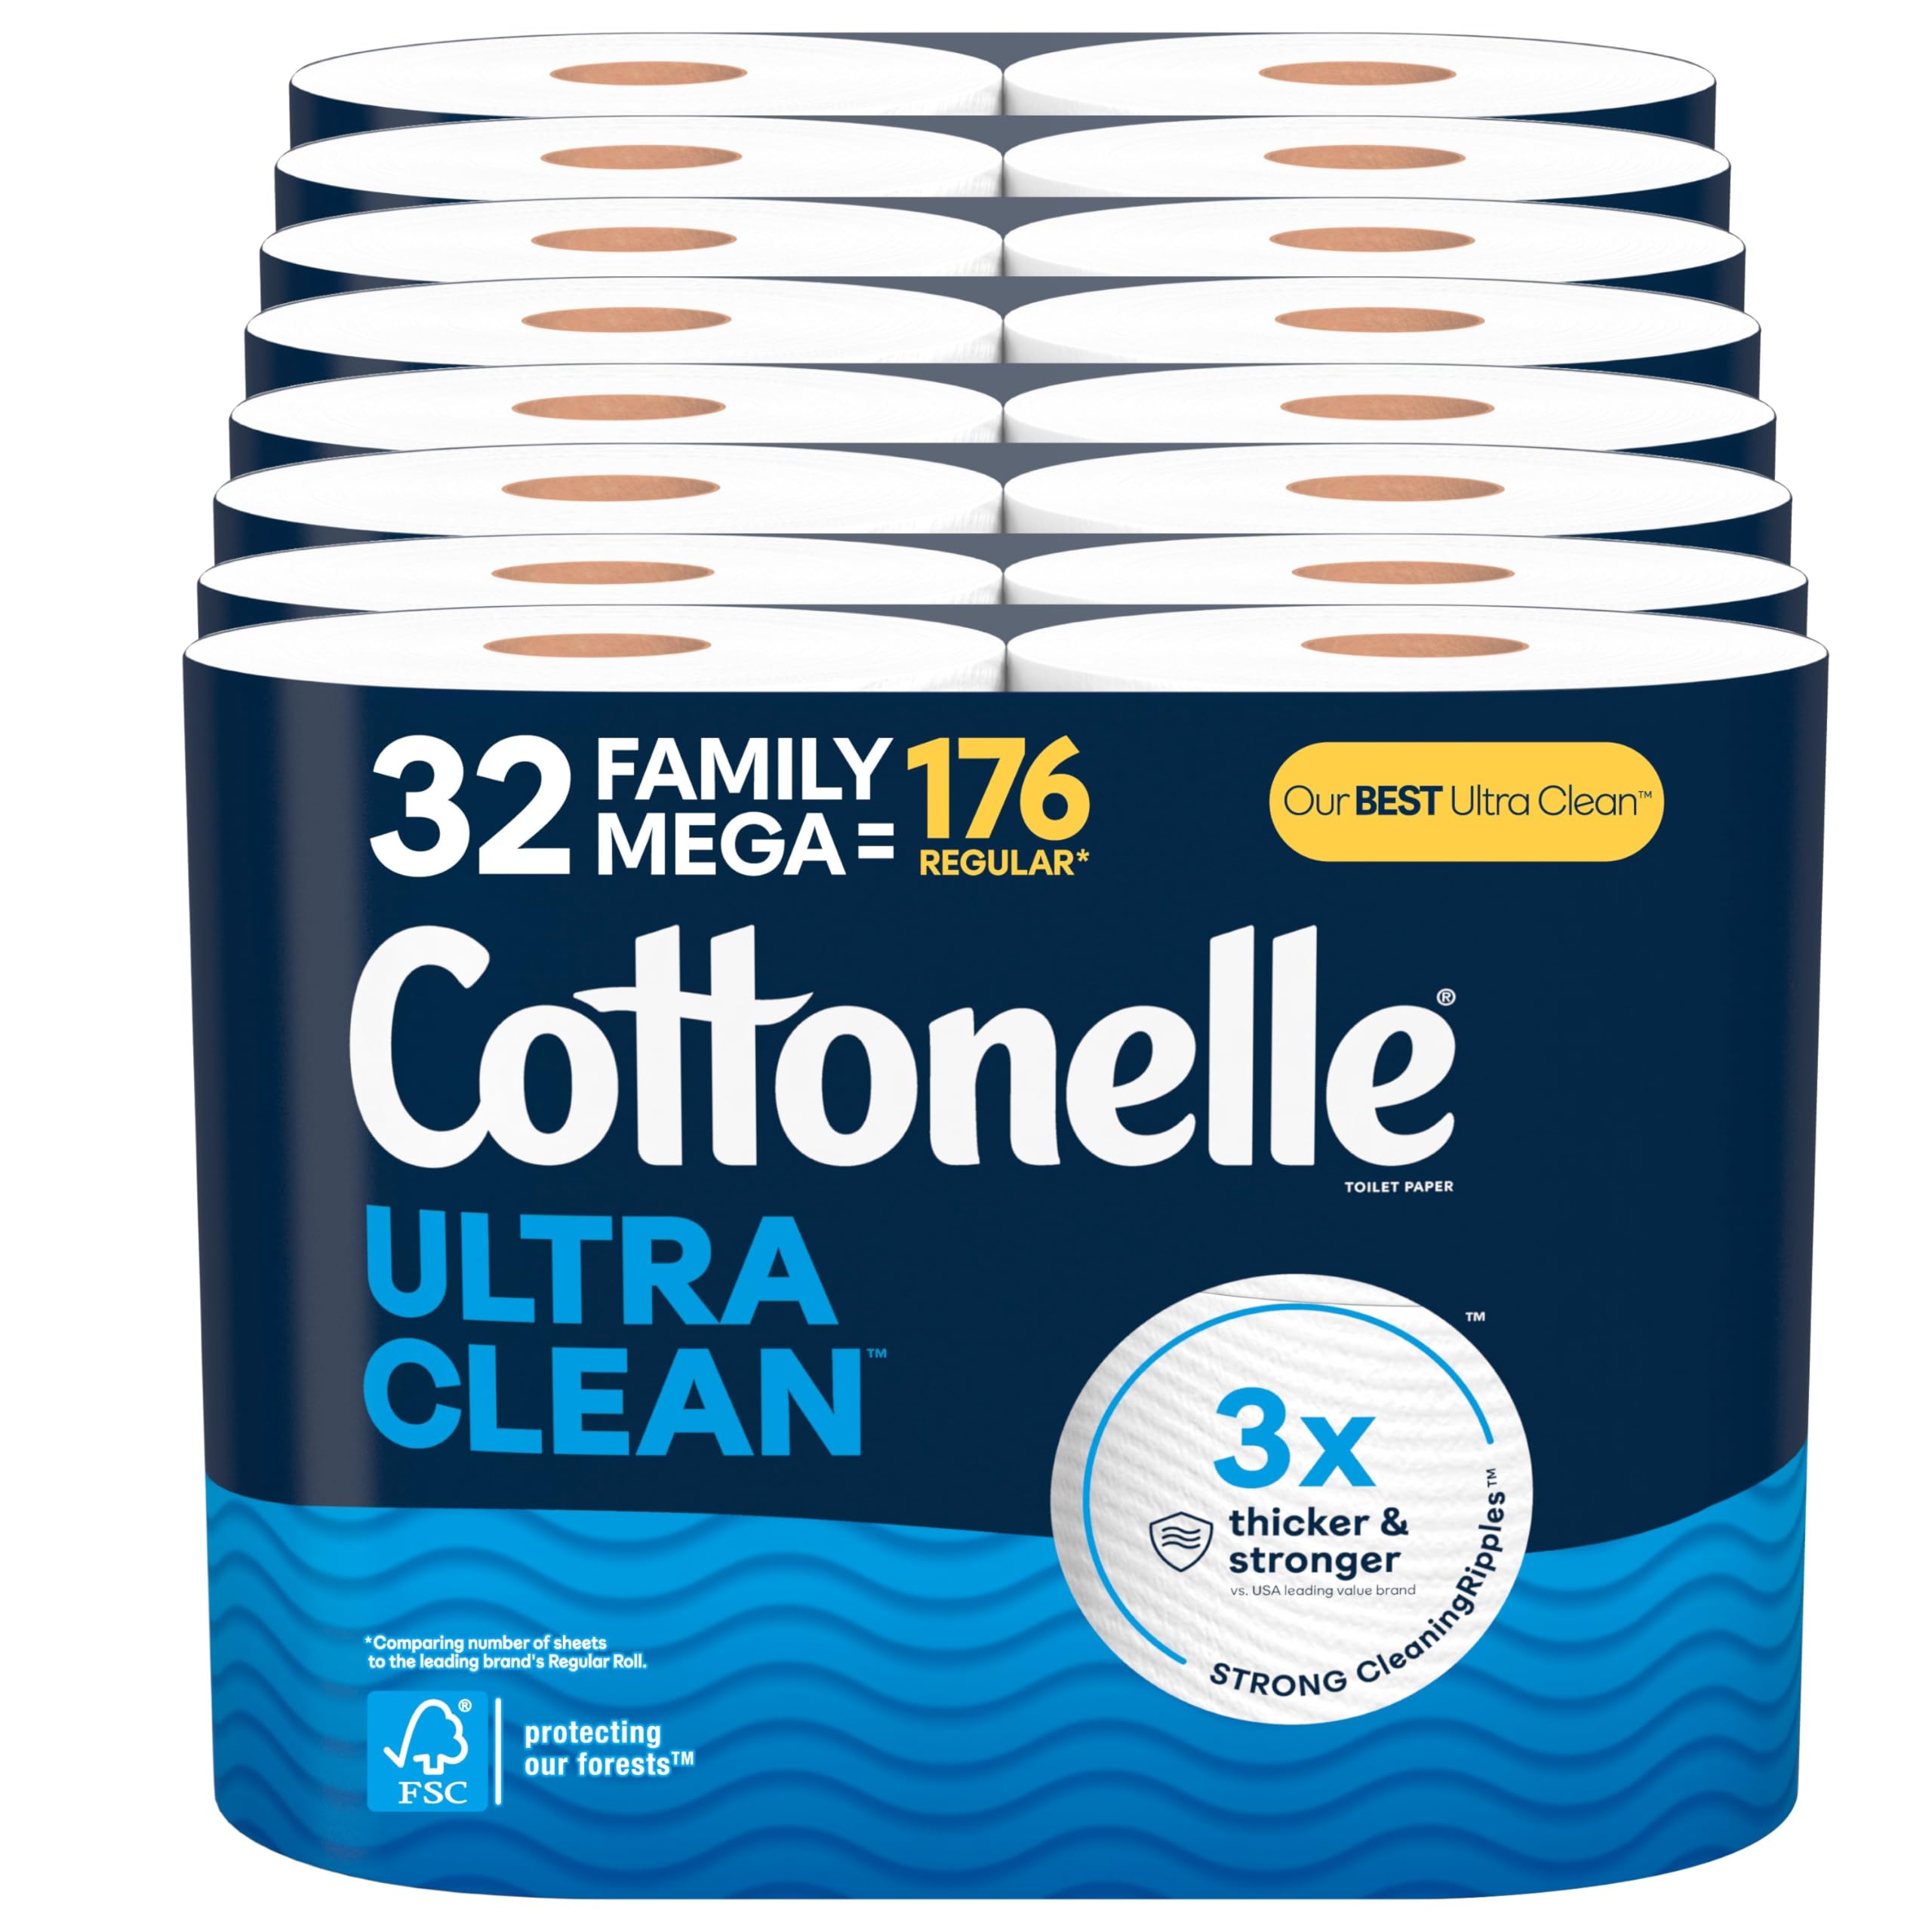 Cottonelle Ultra Clean Toilet Paper with Active CleaningRipples Texture, 32 Family Mega Rolls (32 Family Mega Rolls = 176 Regular Rolls) (8 Packs of 4), 353 Sheets Per Roll, Packaging May Vary